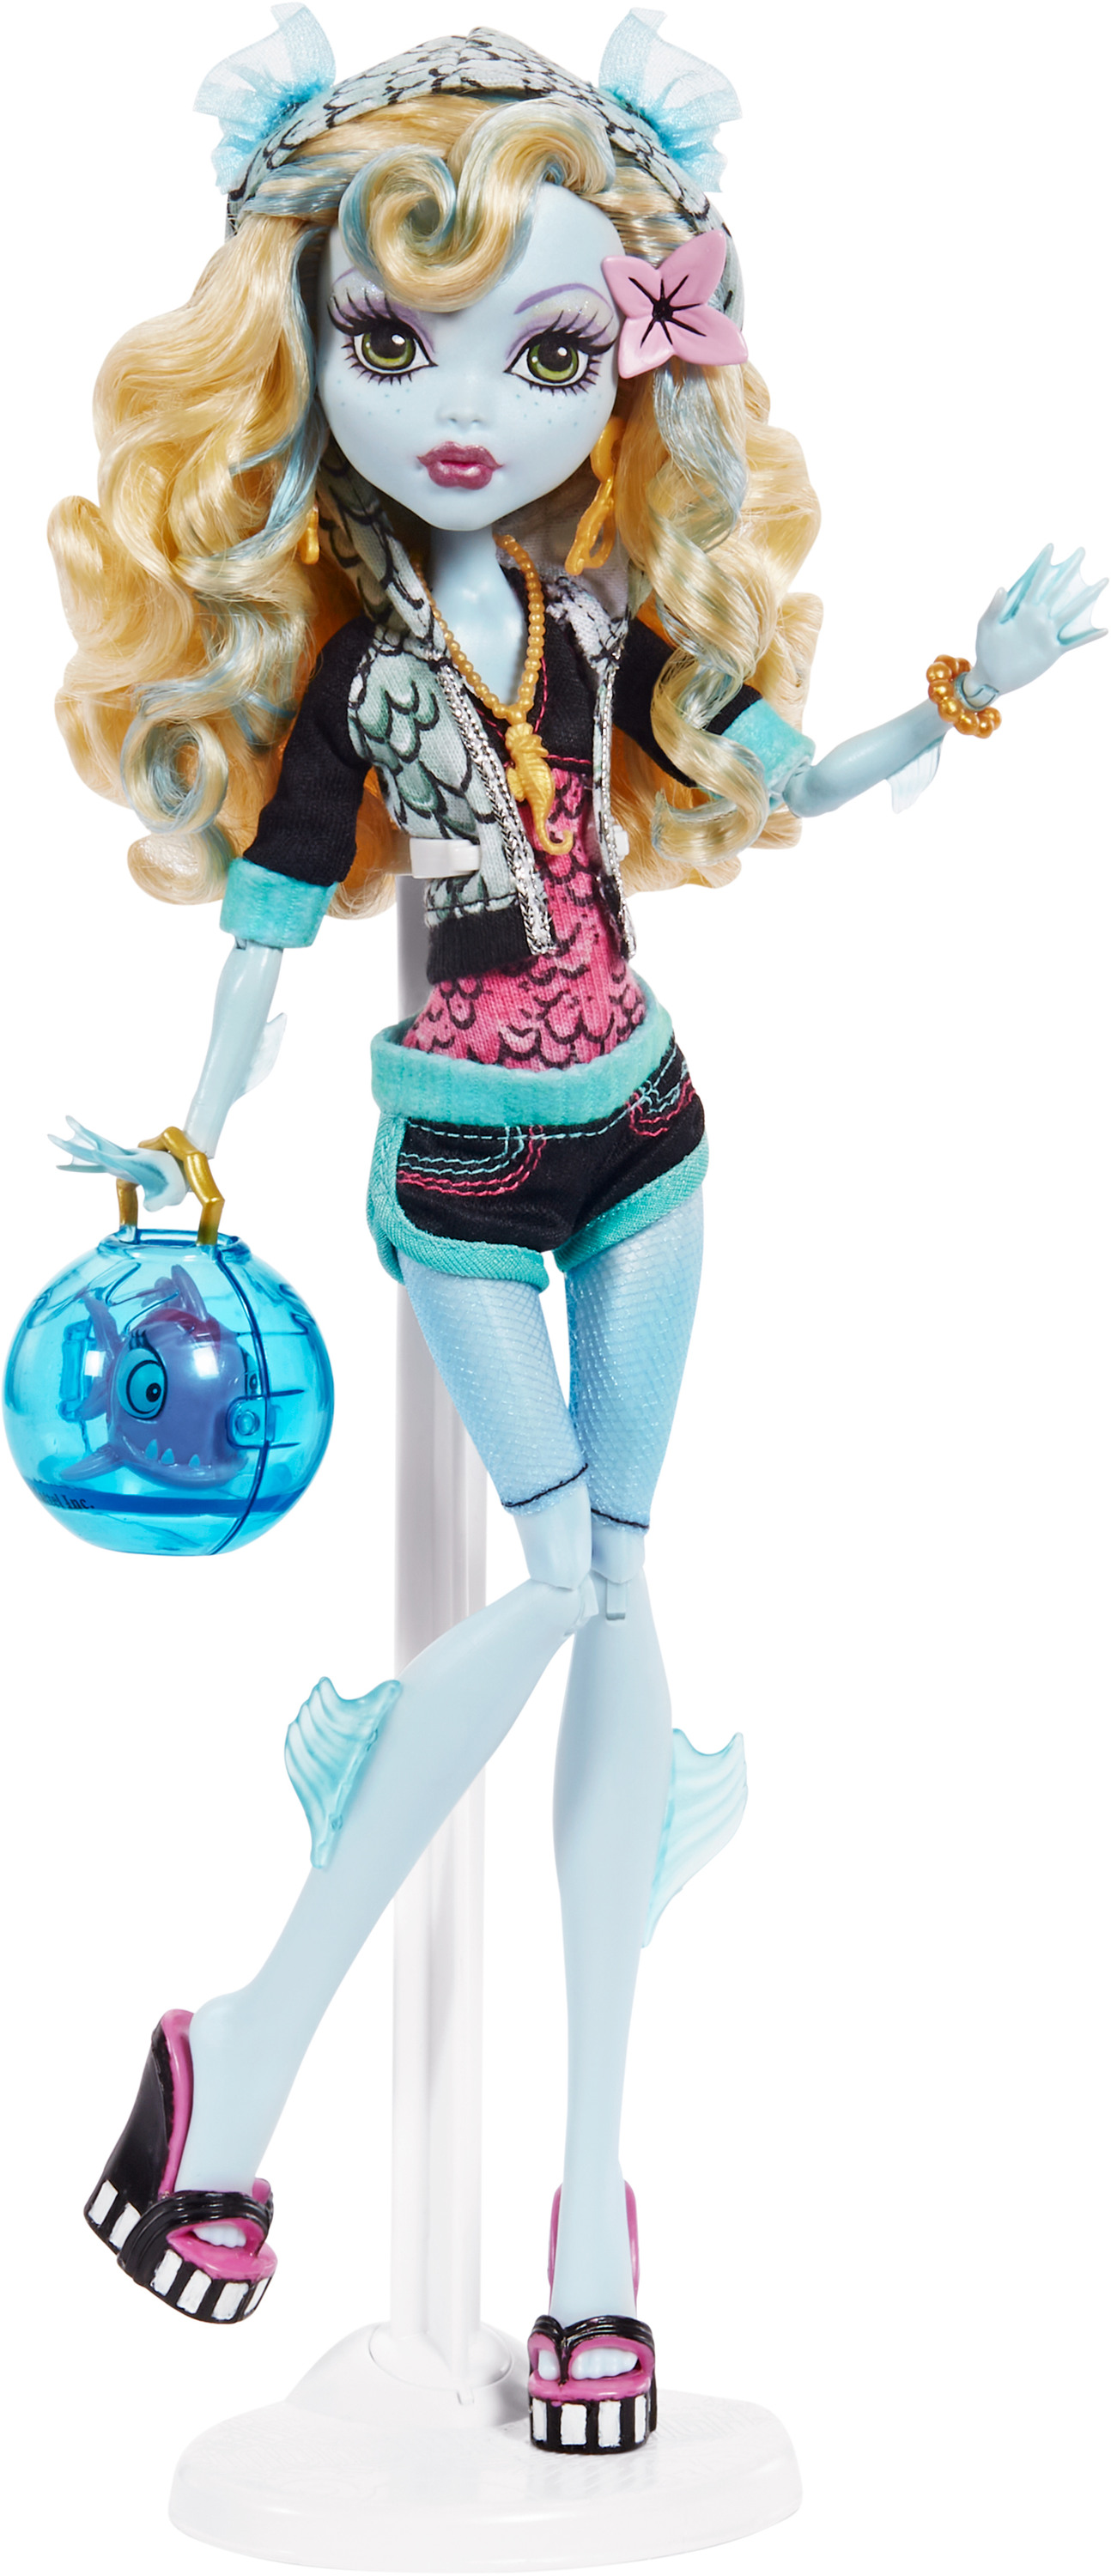 Monster High Lagoona Blue Doll, Collectible Reproduction in Original Look with Diary & Doll Stand - image 1 of 6